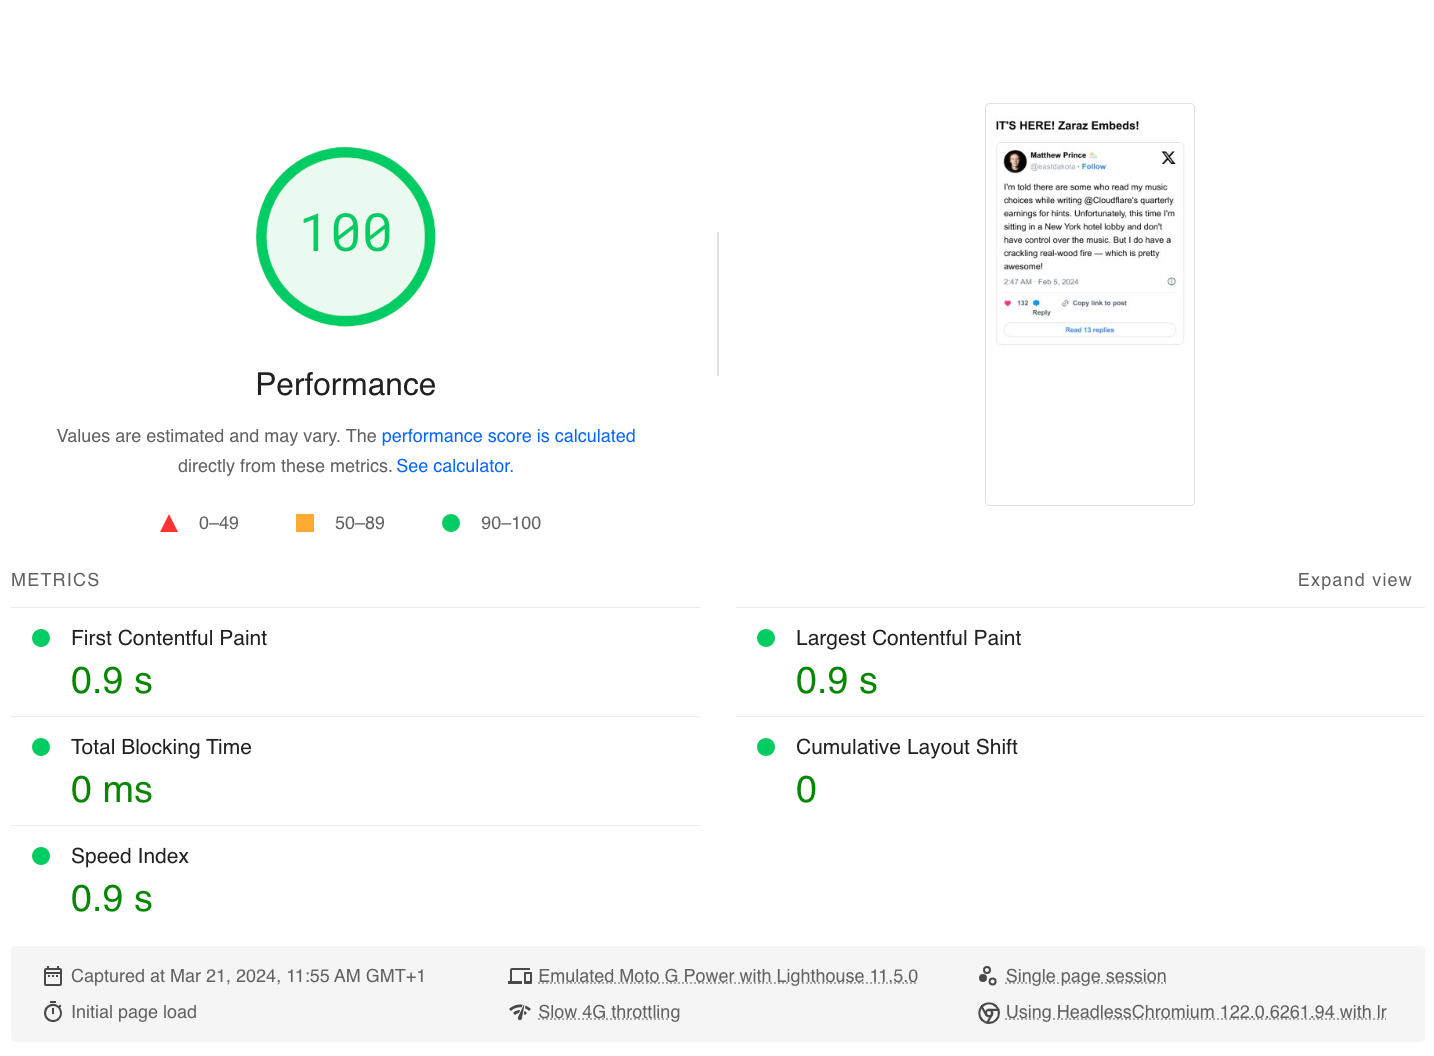 Cloudflare Zaraz Twitter Embed scores 100 in Google PageSpeed Insights test